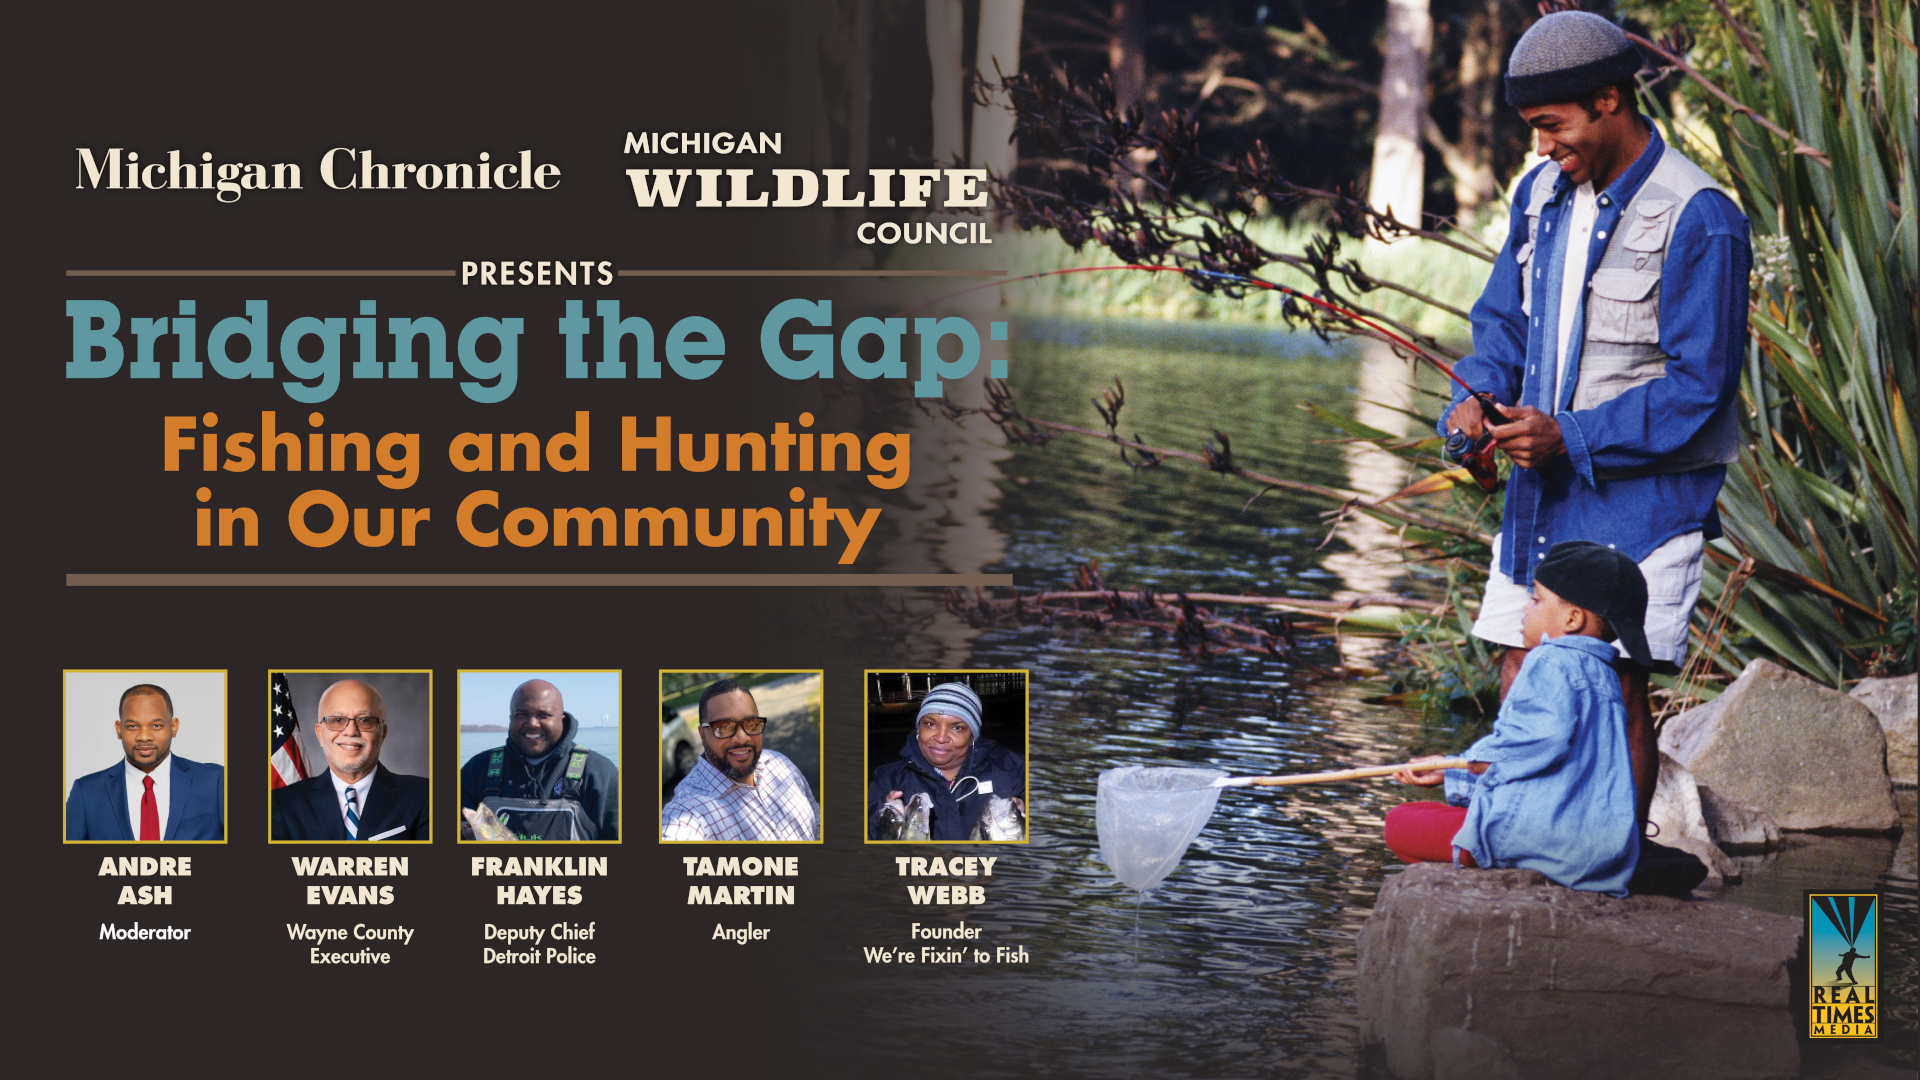 Bridging the Gap: Hunting and Fishing in Our Community